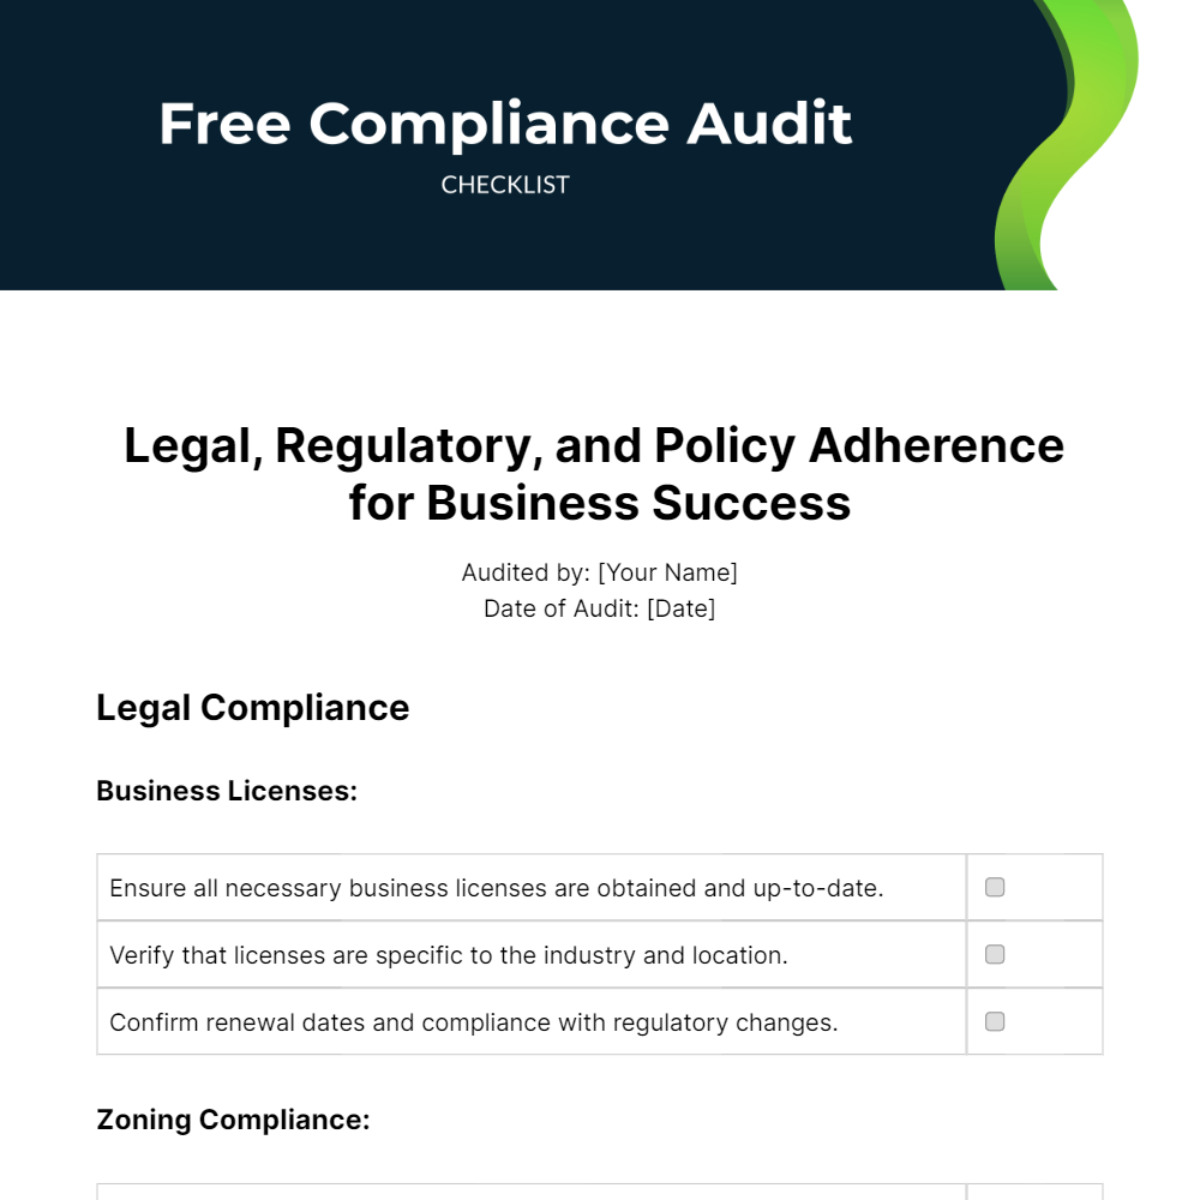 Free Compliance Audit Checklist Template